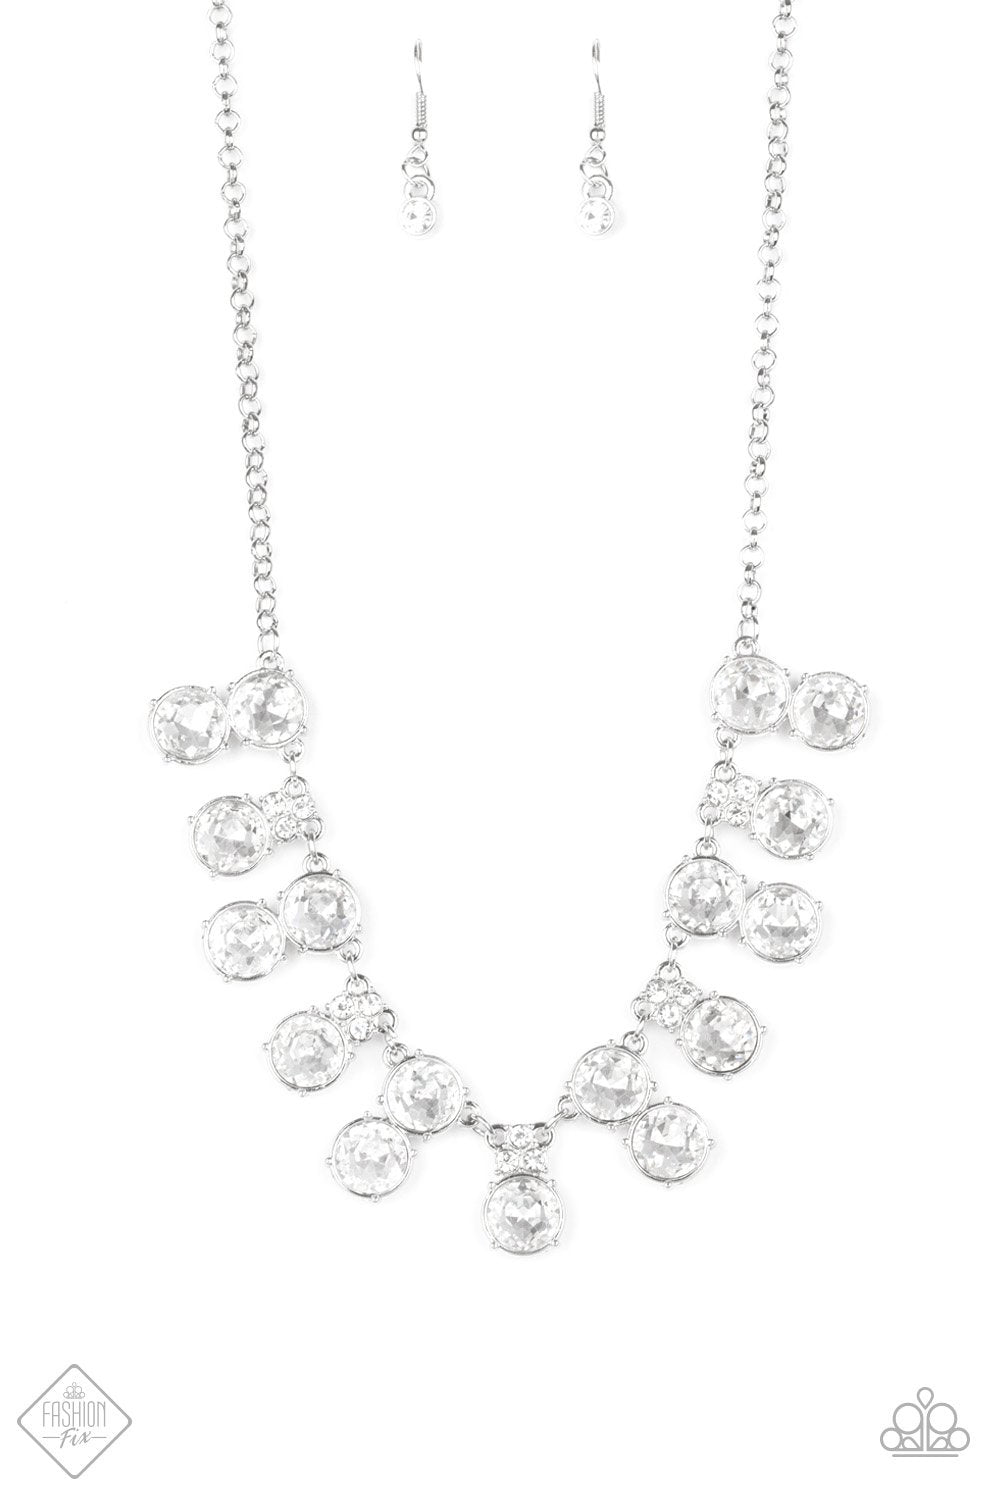 Paparazzi Top Dollar Twinkle White Short Necklace - Fashion Fix Fiercely 5th Avenue May 2020